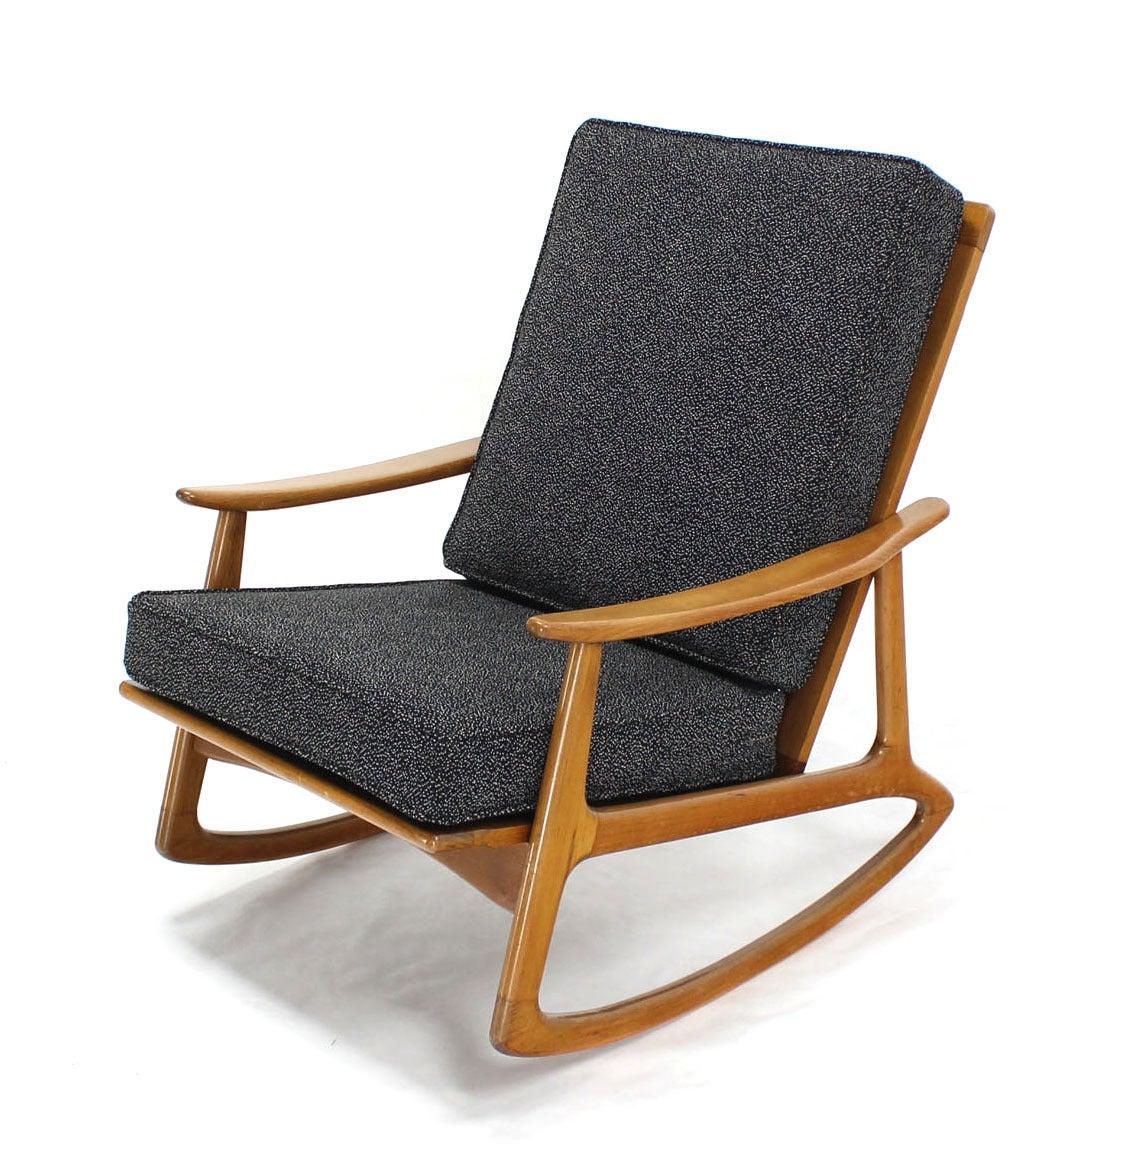 New charcoal fabric removable cushions upholstery Danish Mid-Century Modern rocking lounge chair.